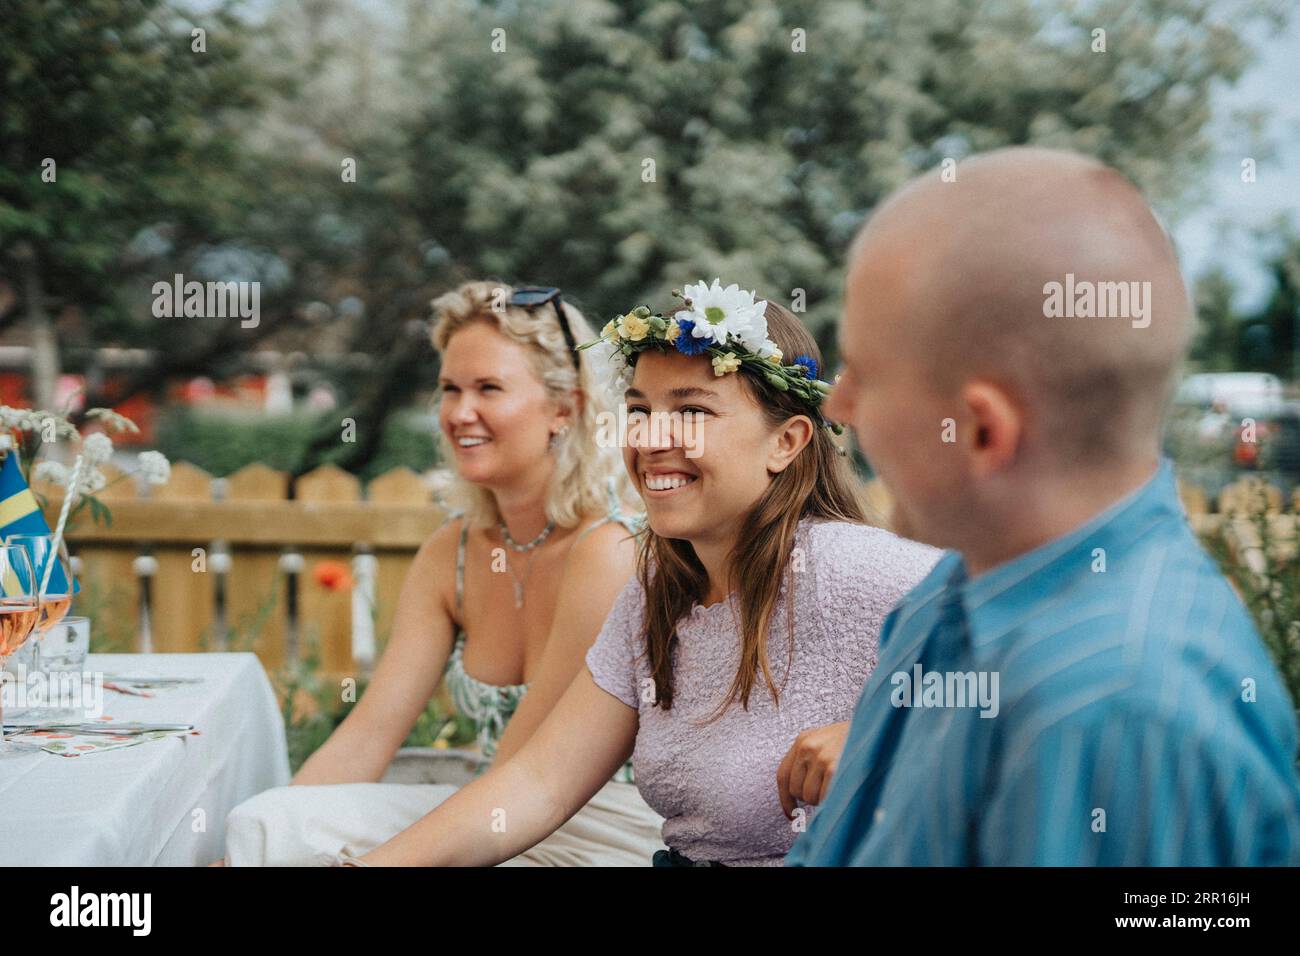 Smiling young woman wearing tiara while enjoying with friends during dinner party at cafe Stock Photo